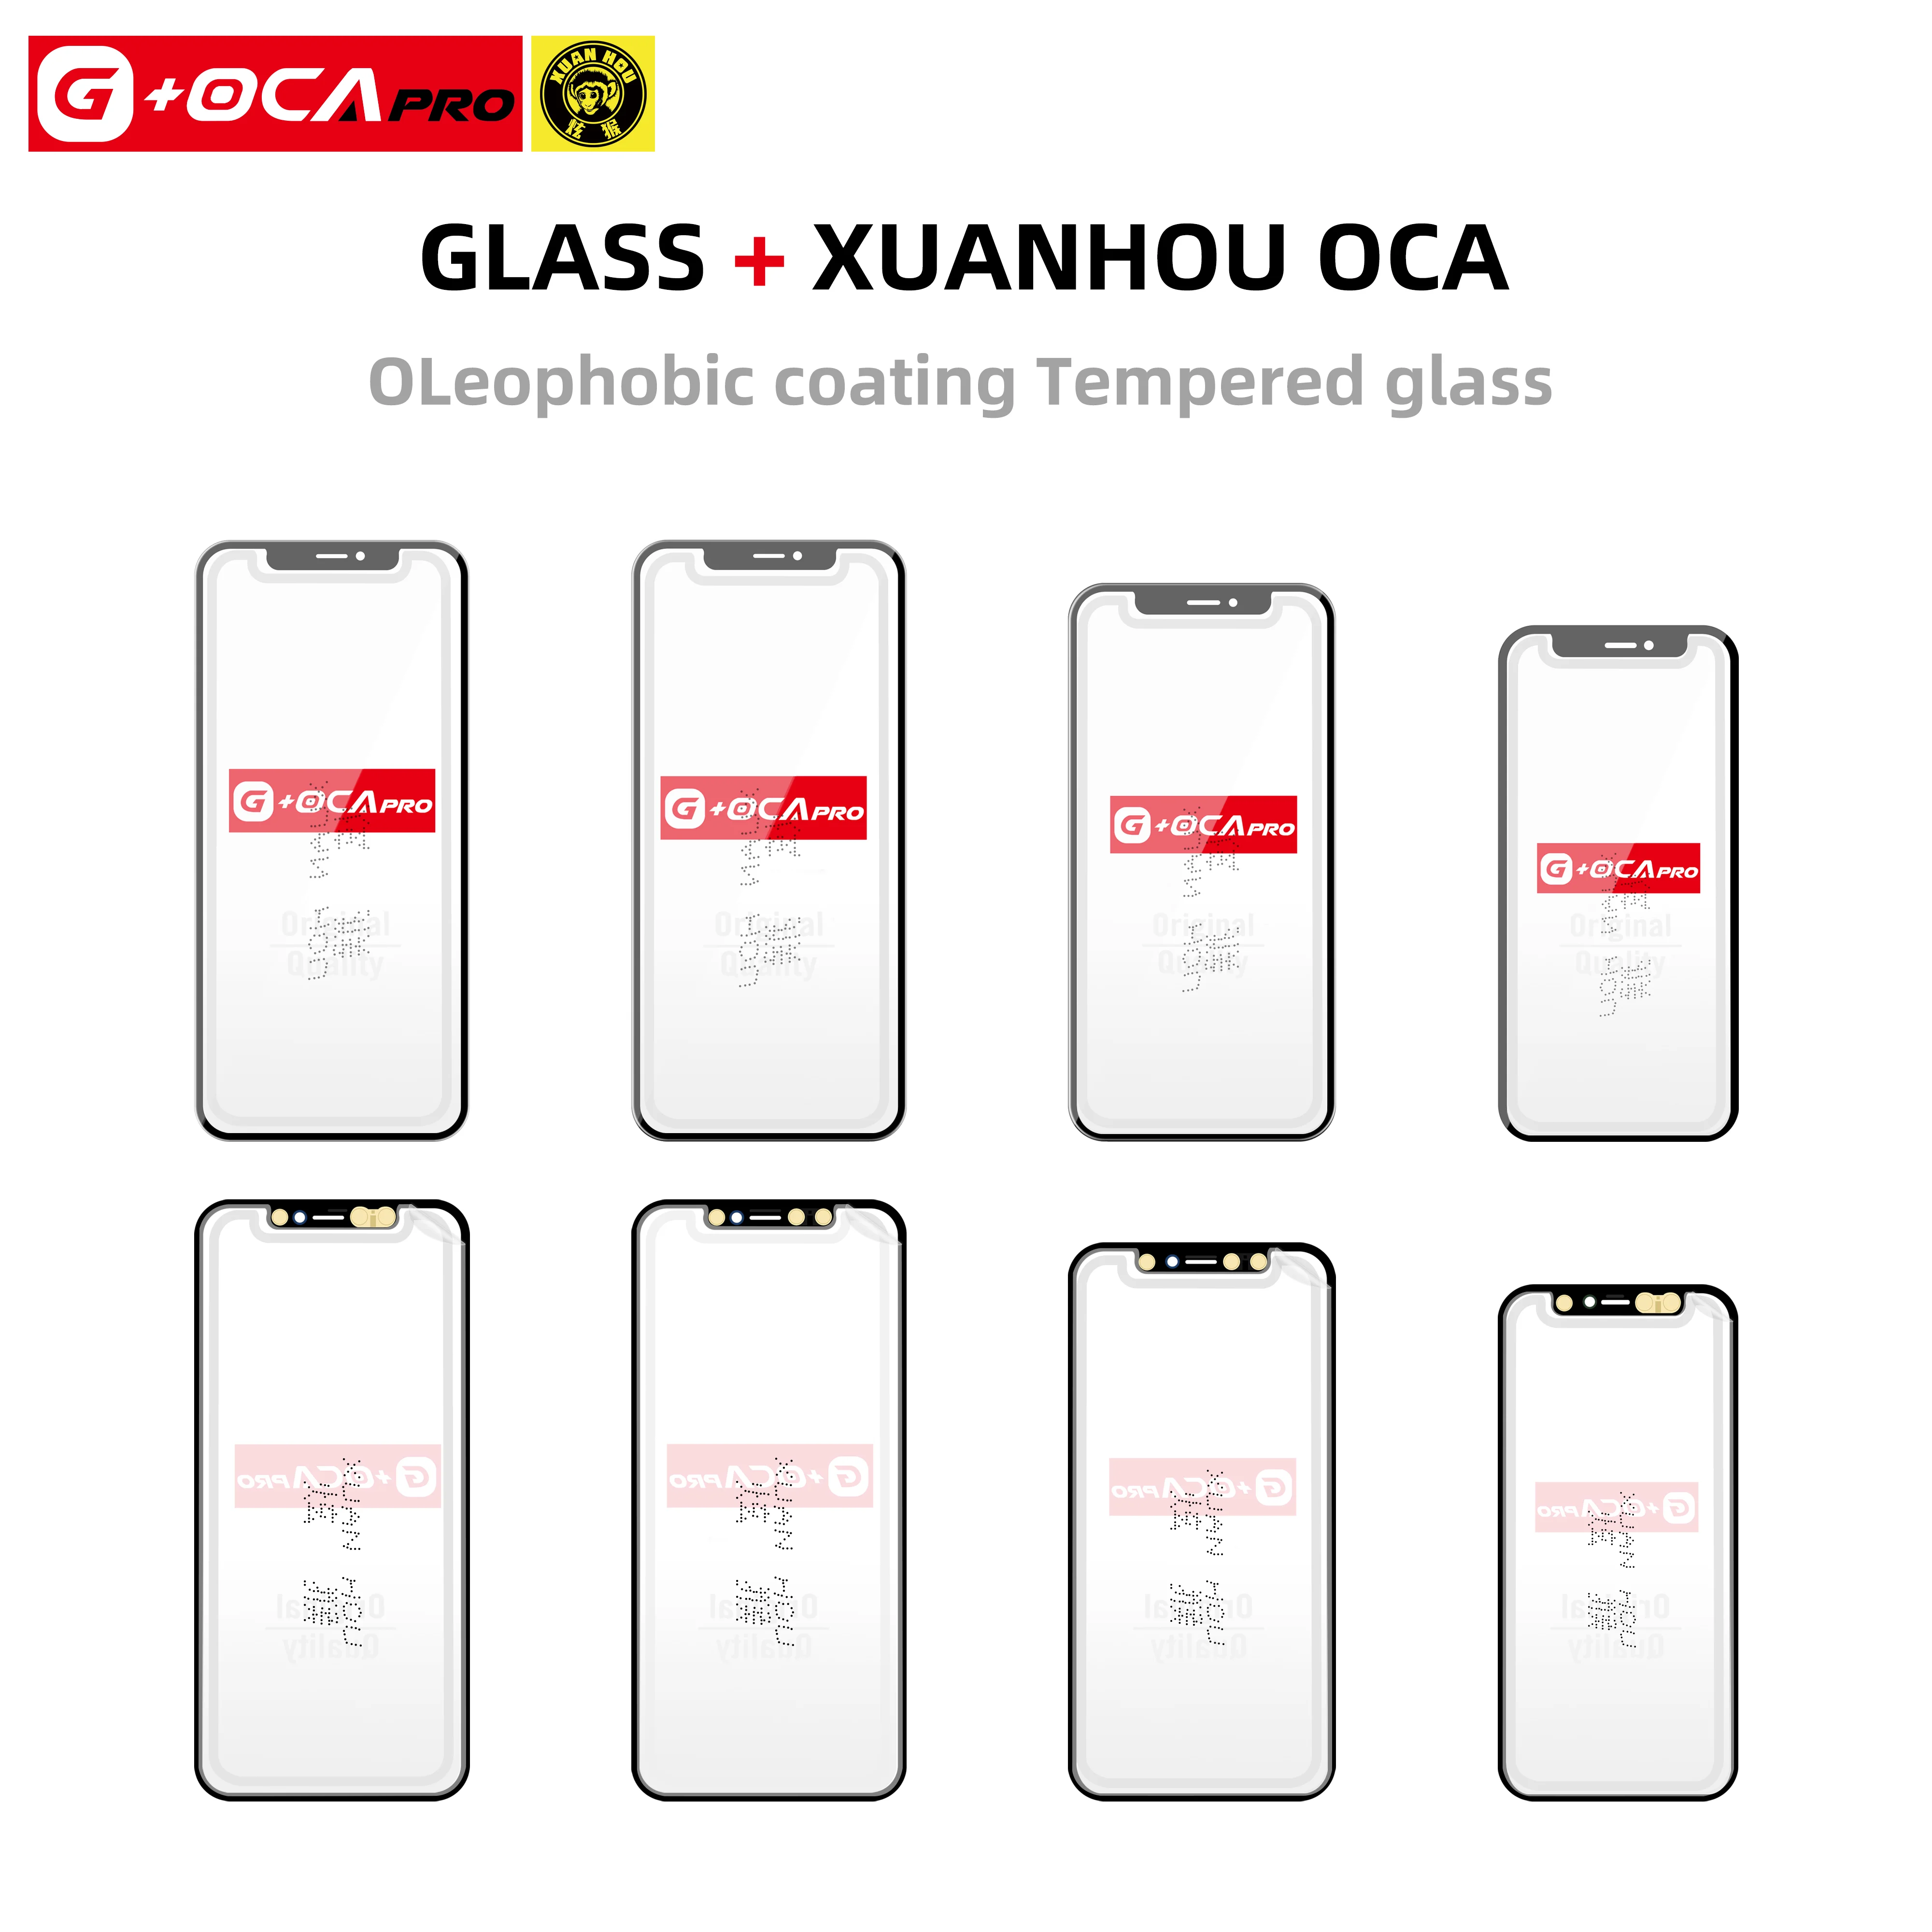 

10pcs G+oca Pro Glass With Oca For iPhone X Xs Max Xr 11Pro 12Pro 13Pro 11 12 13 Pro Max LCD Display Screen Glass Replace Repair